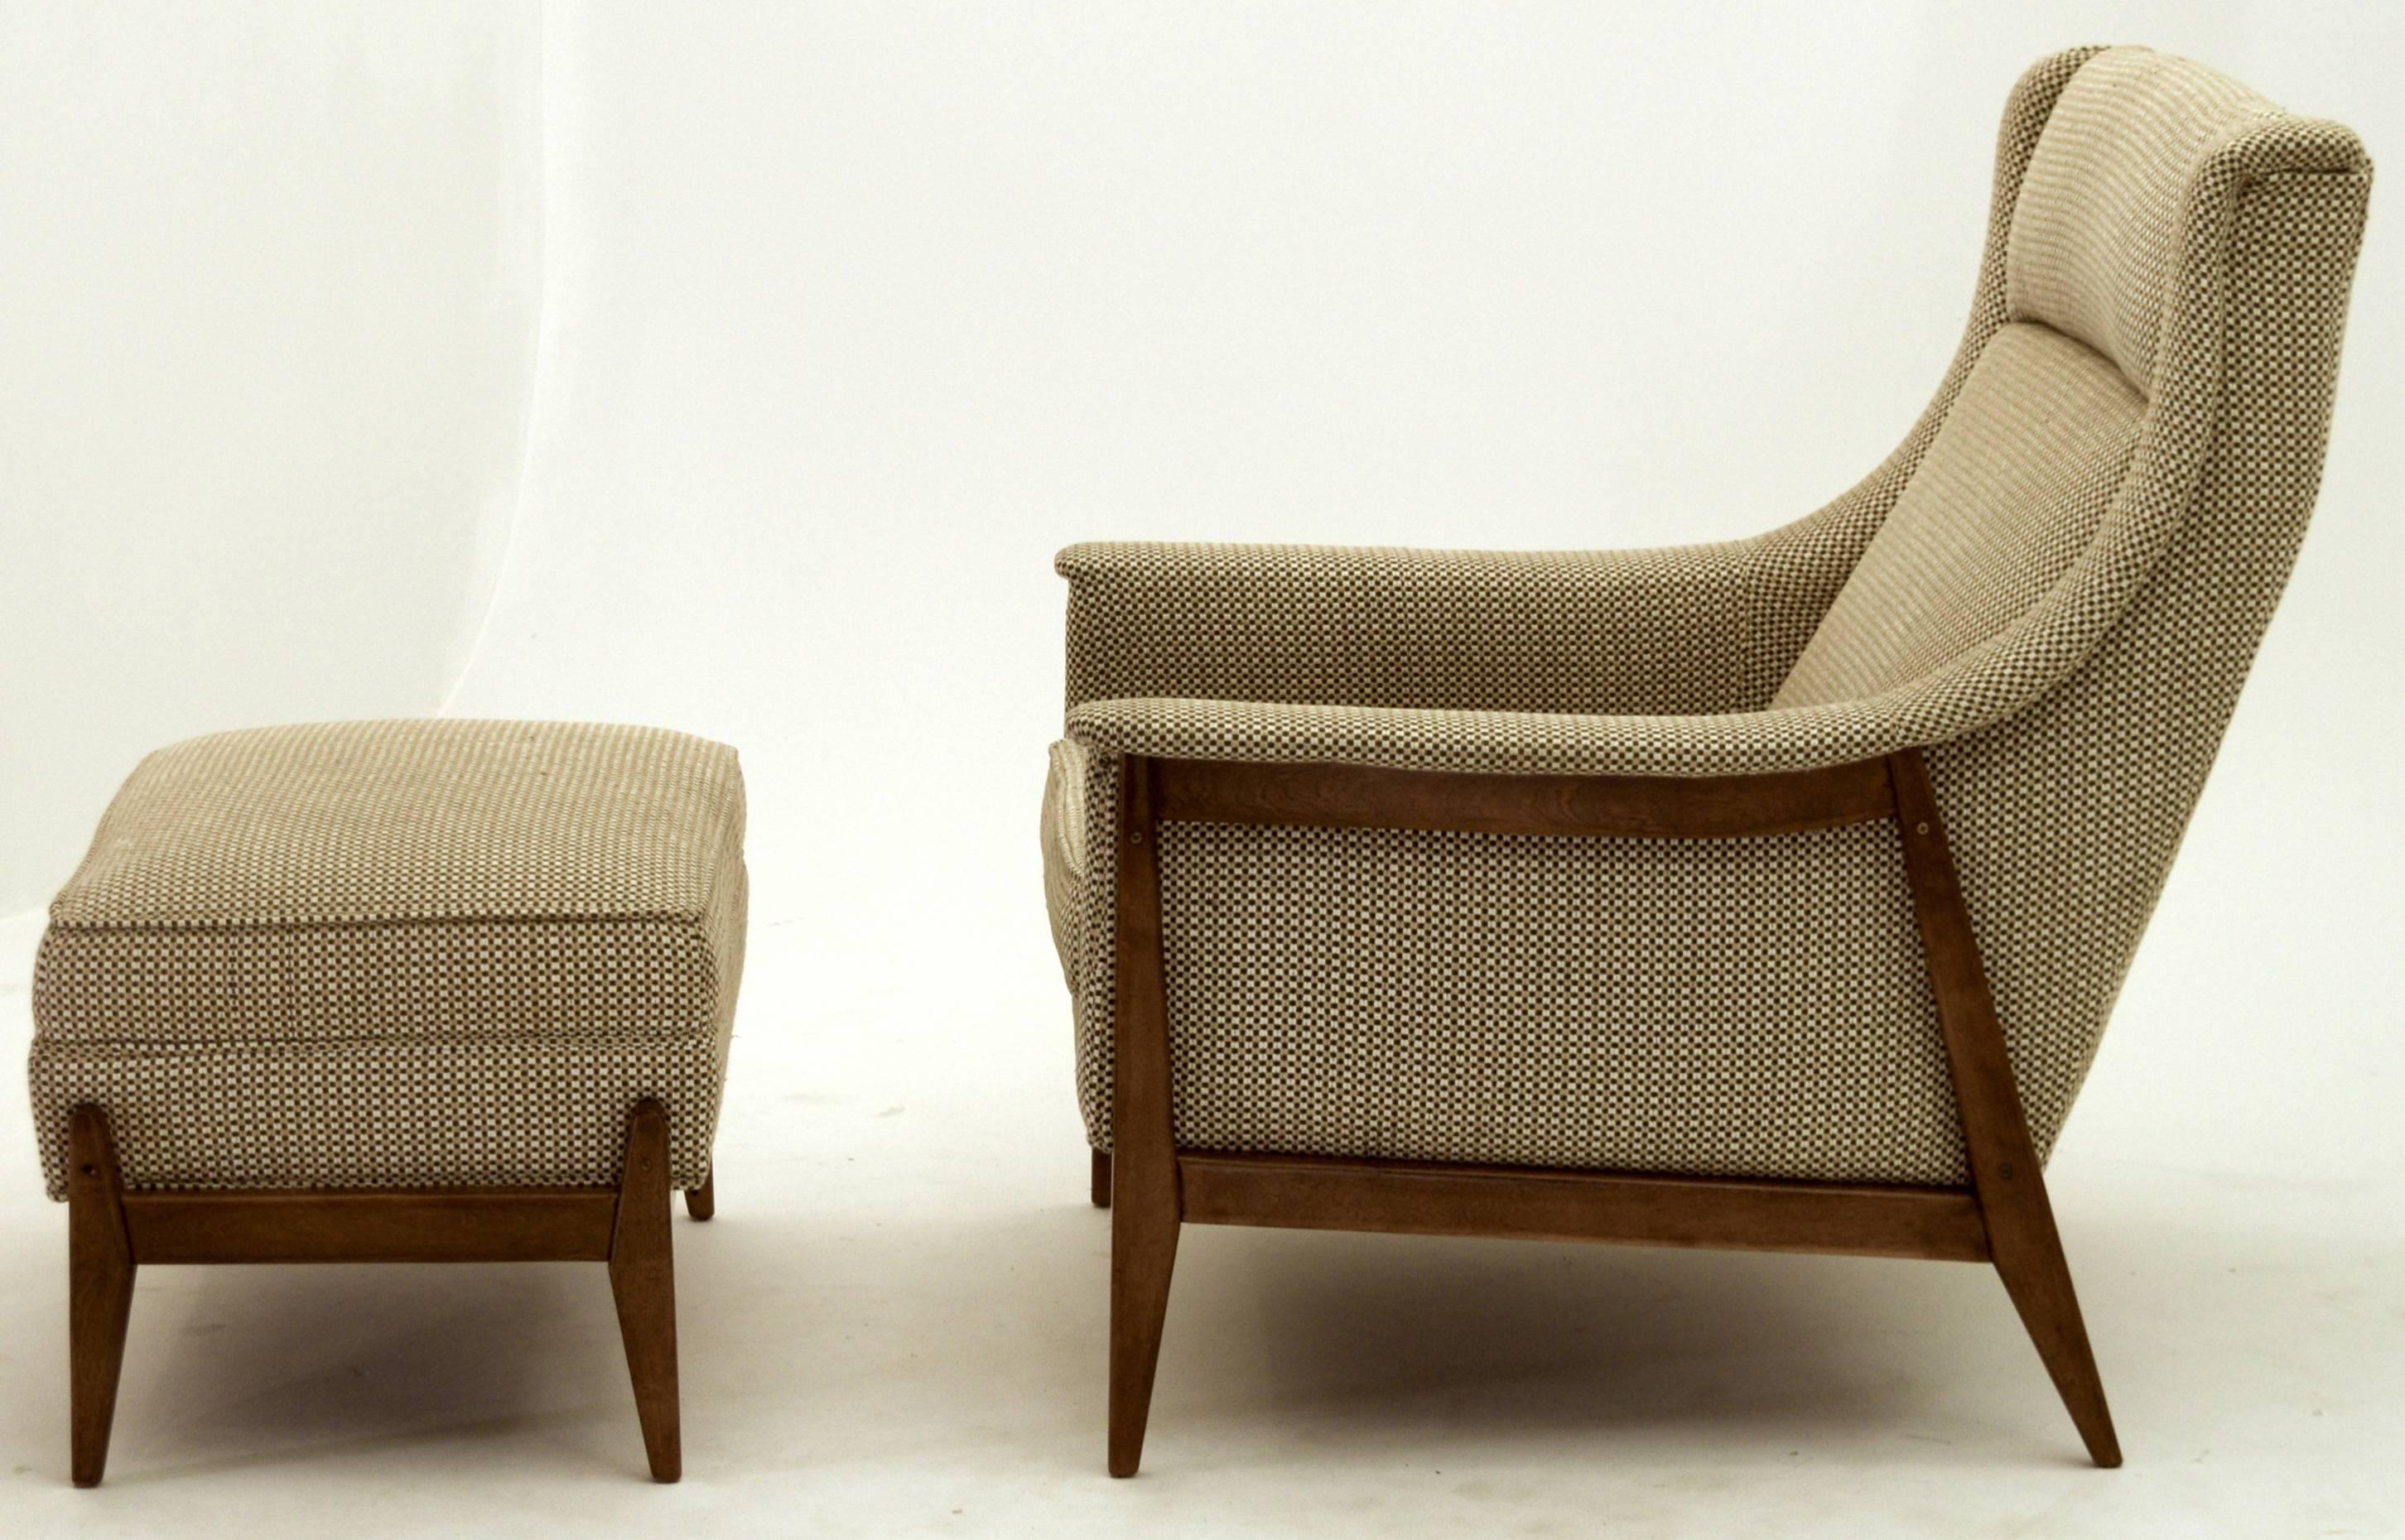 Mid-20th Century Exquisite Armchair and Ottoman by Selig in Original Cotton Felt